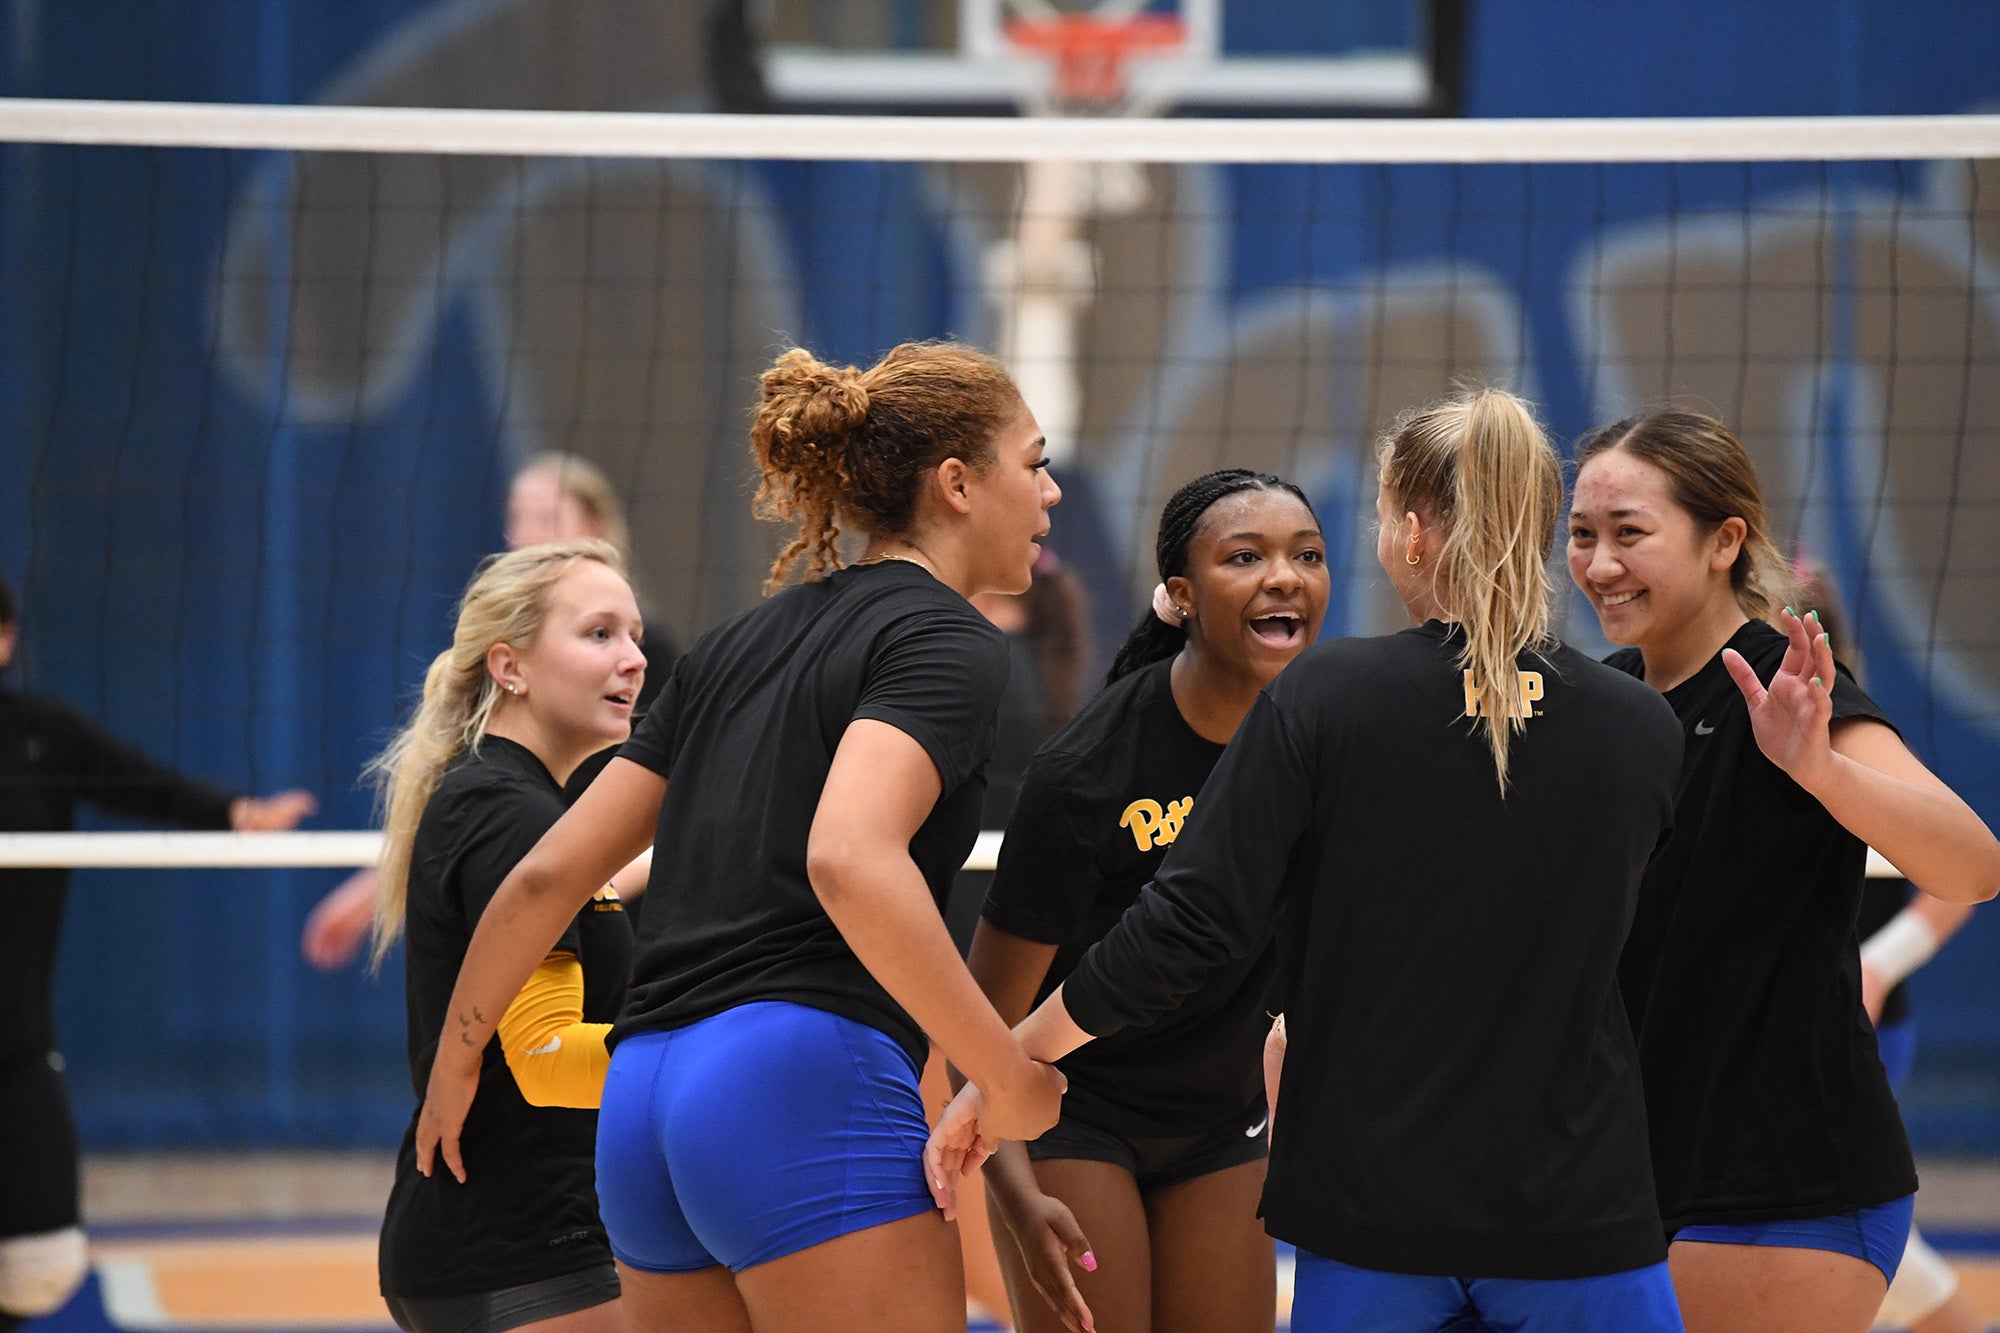 Volleyball players huddle in front of the net